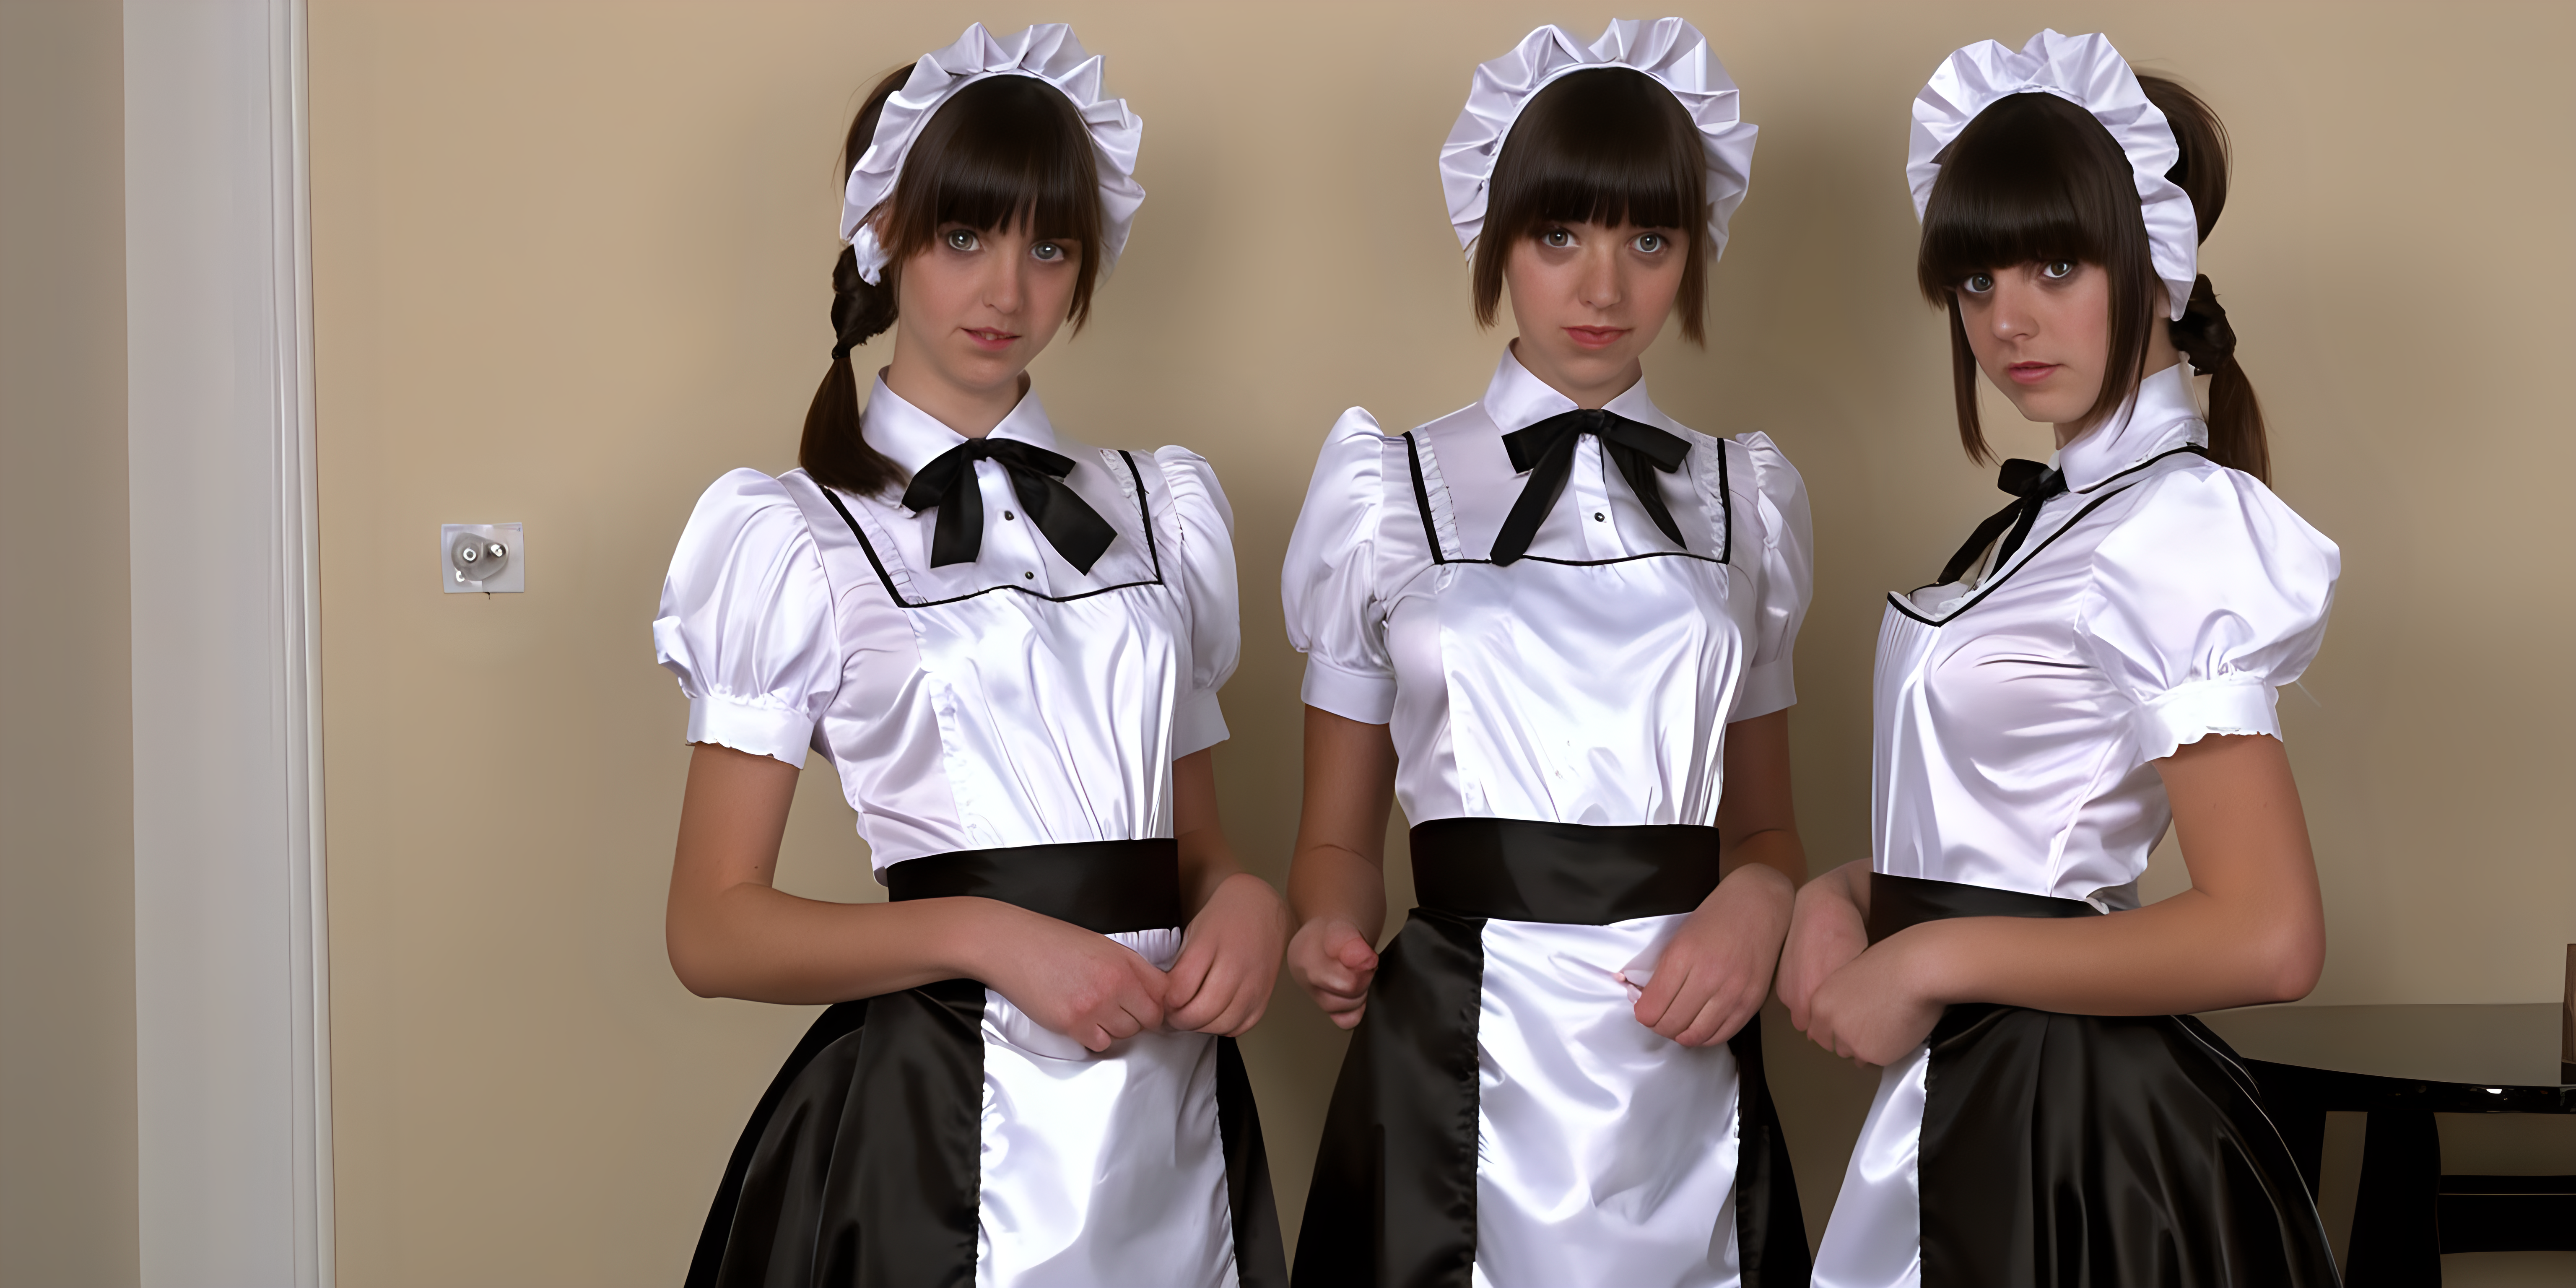 two Girl in satin long maid uniforms